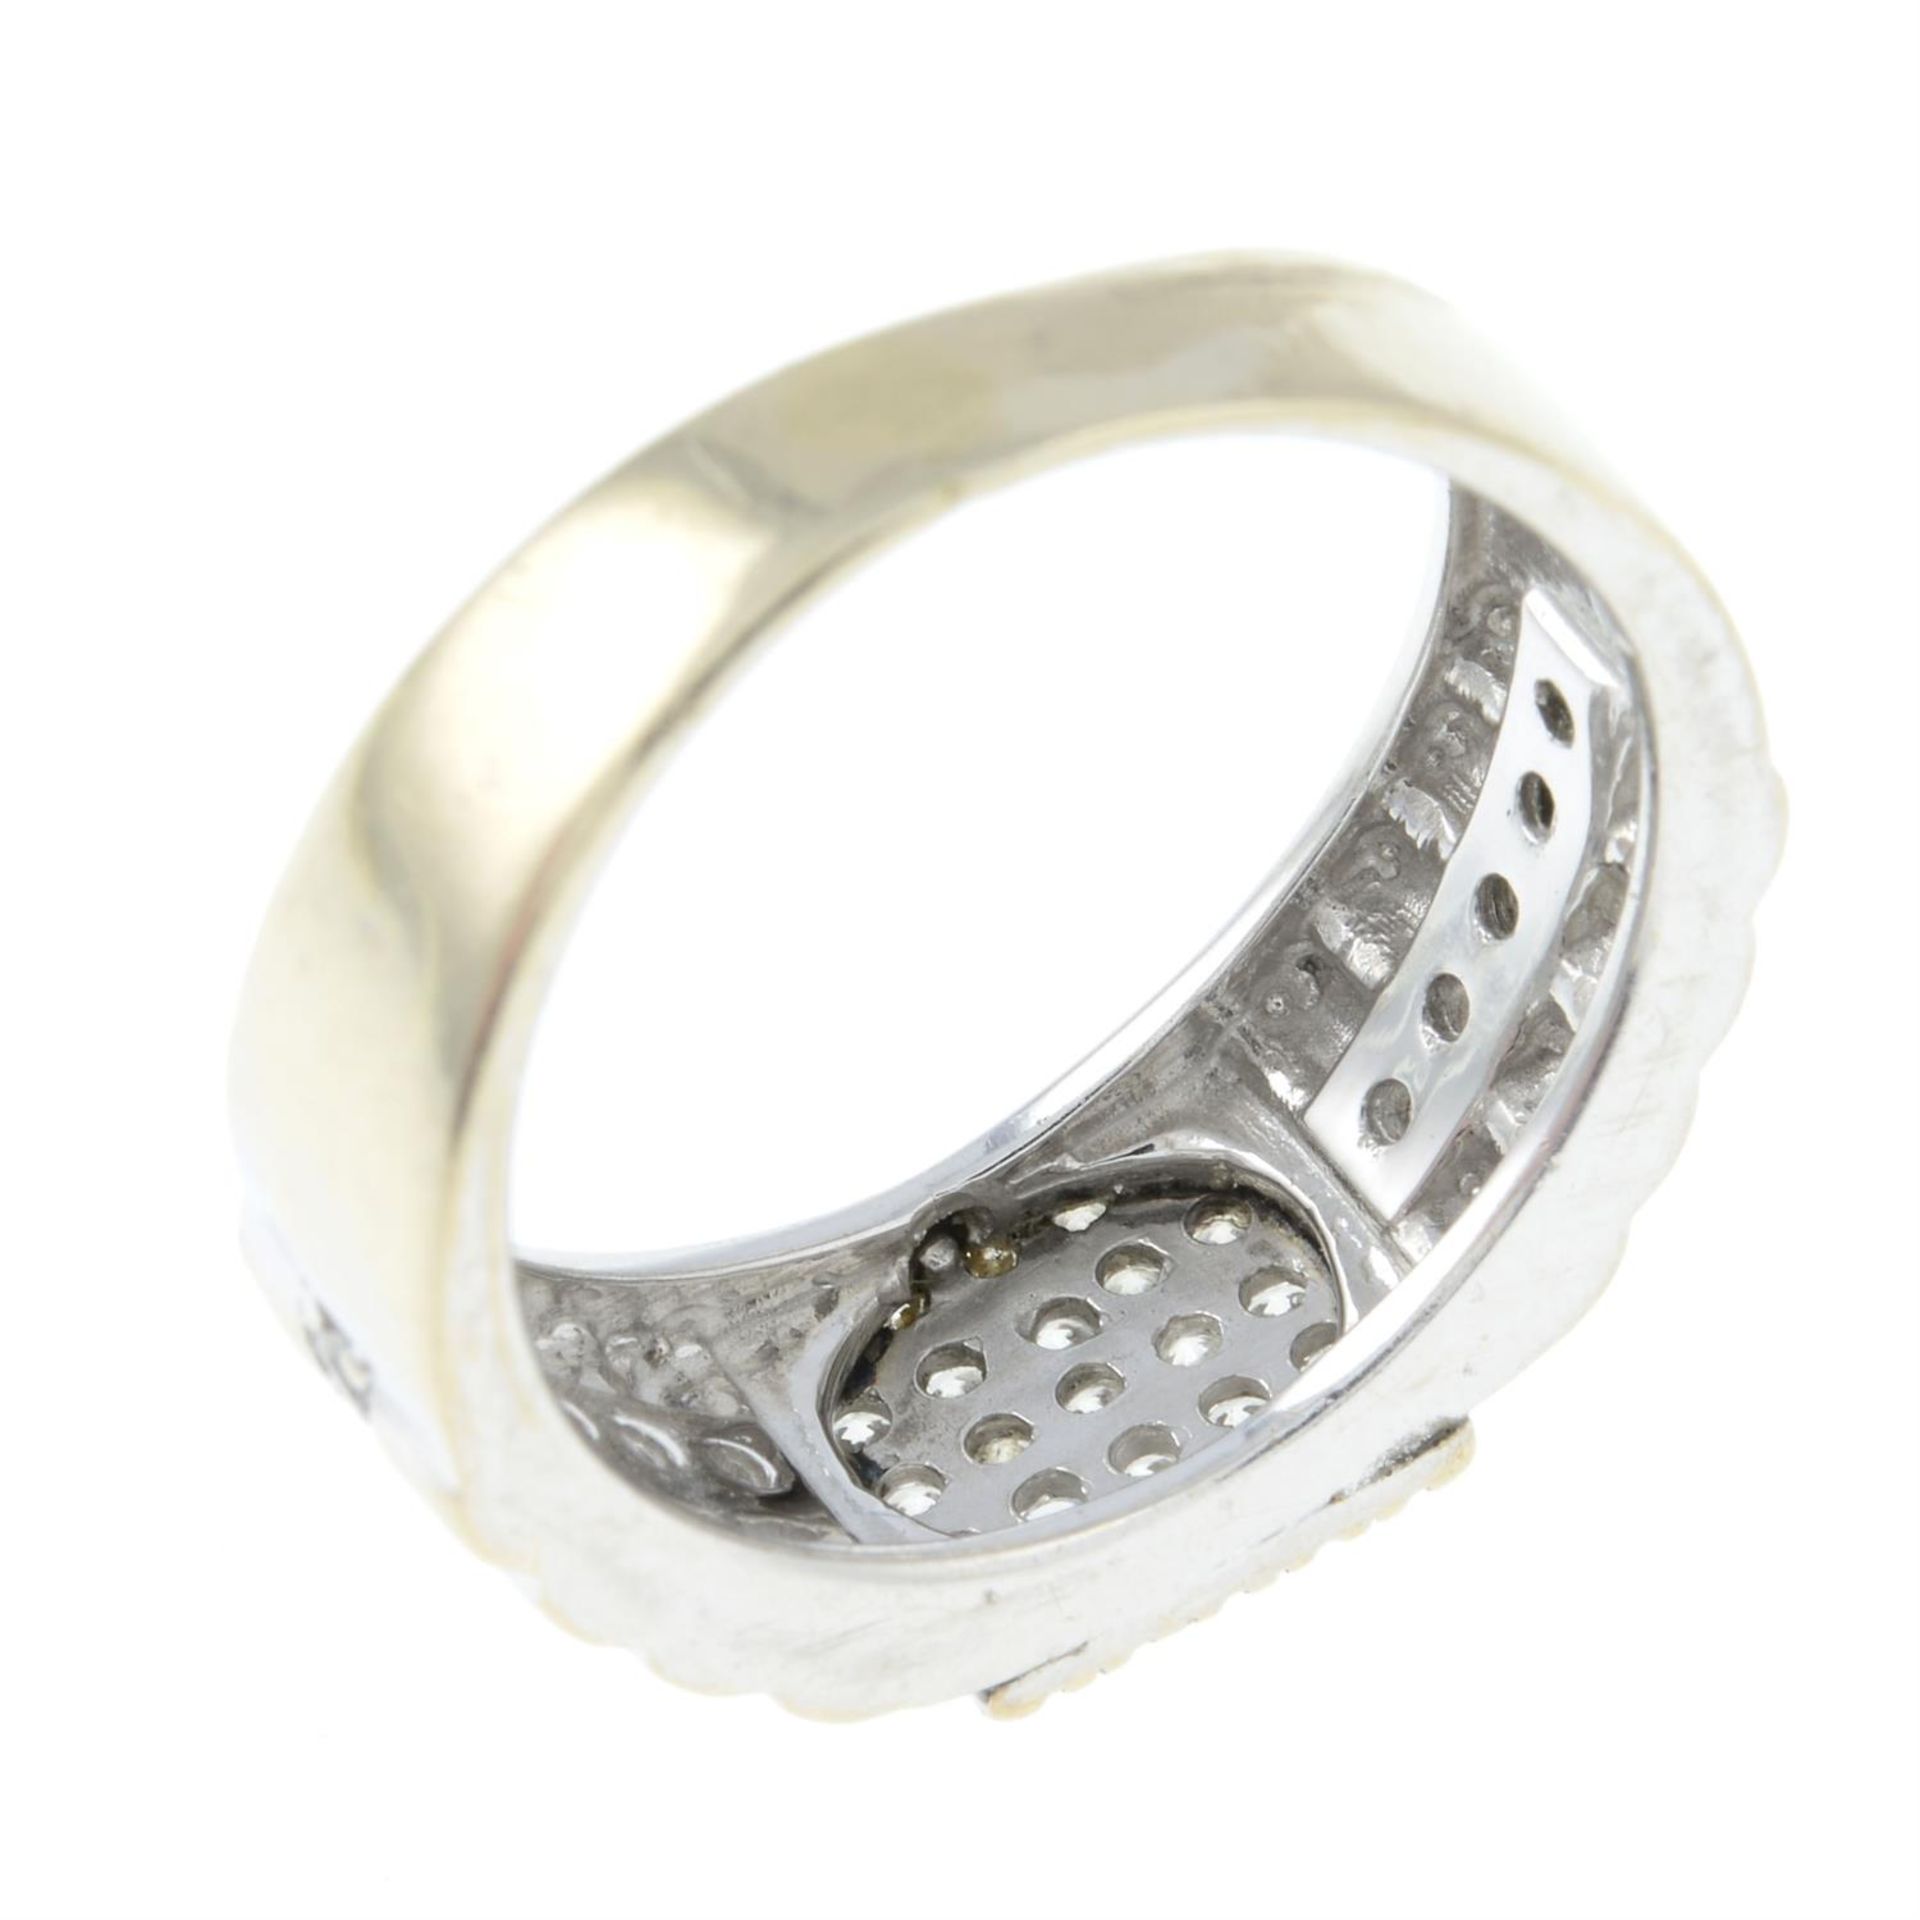 A cubic zirconia dress ring. - Image 2 of 2